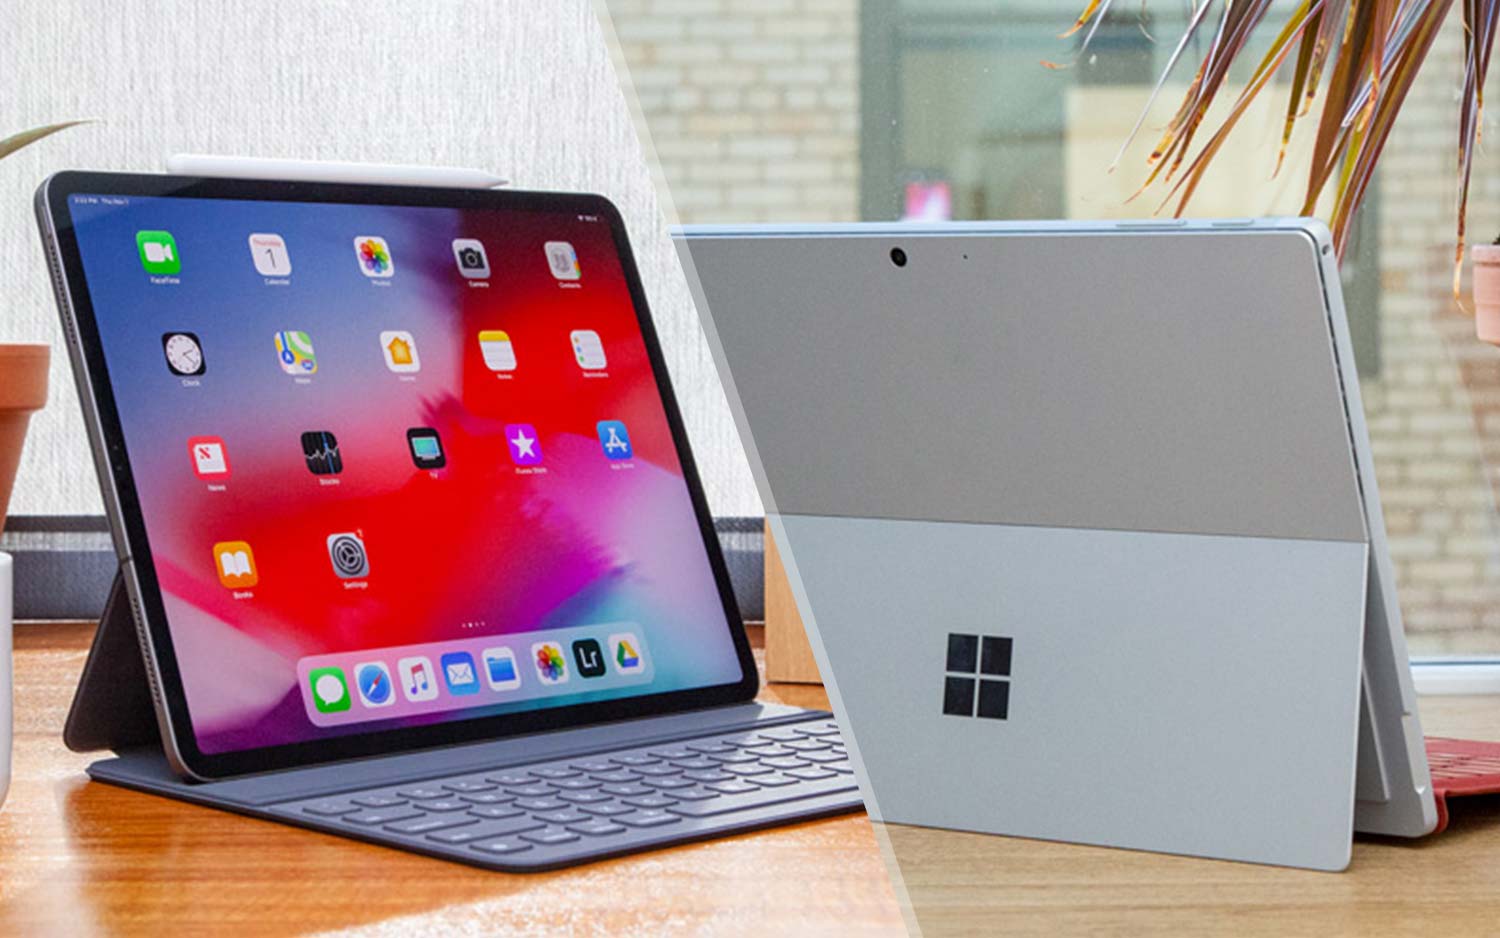 In 2019 Microsoft spent more than 4 times more promoting the Surface than the Apple iPad